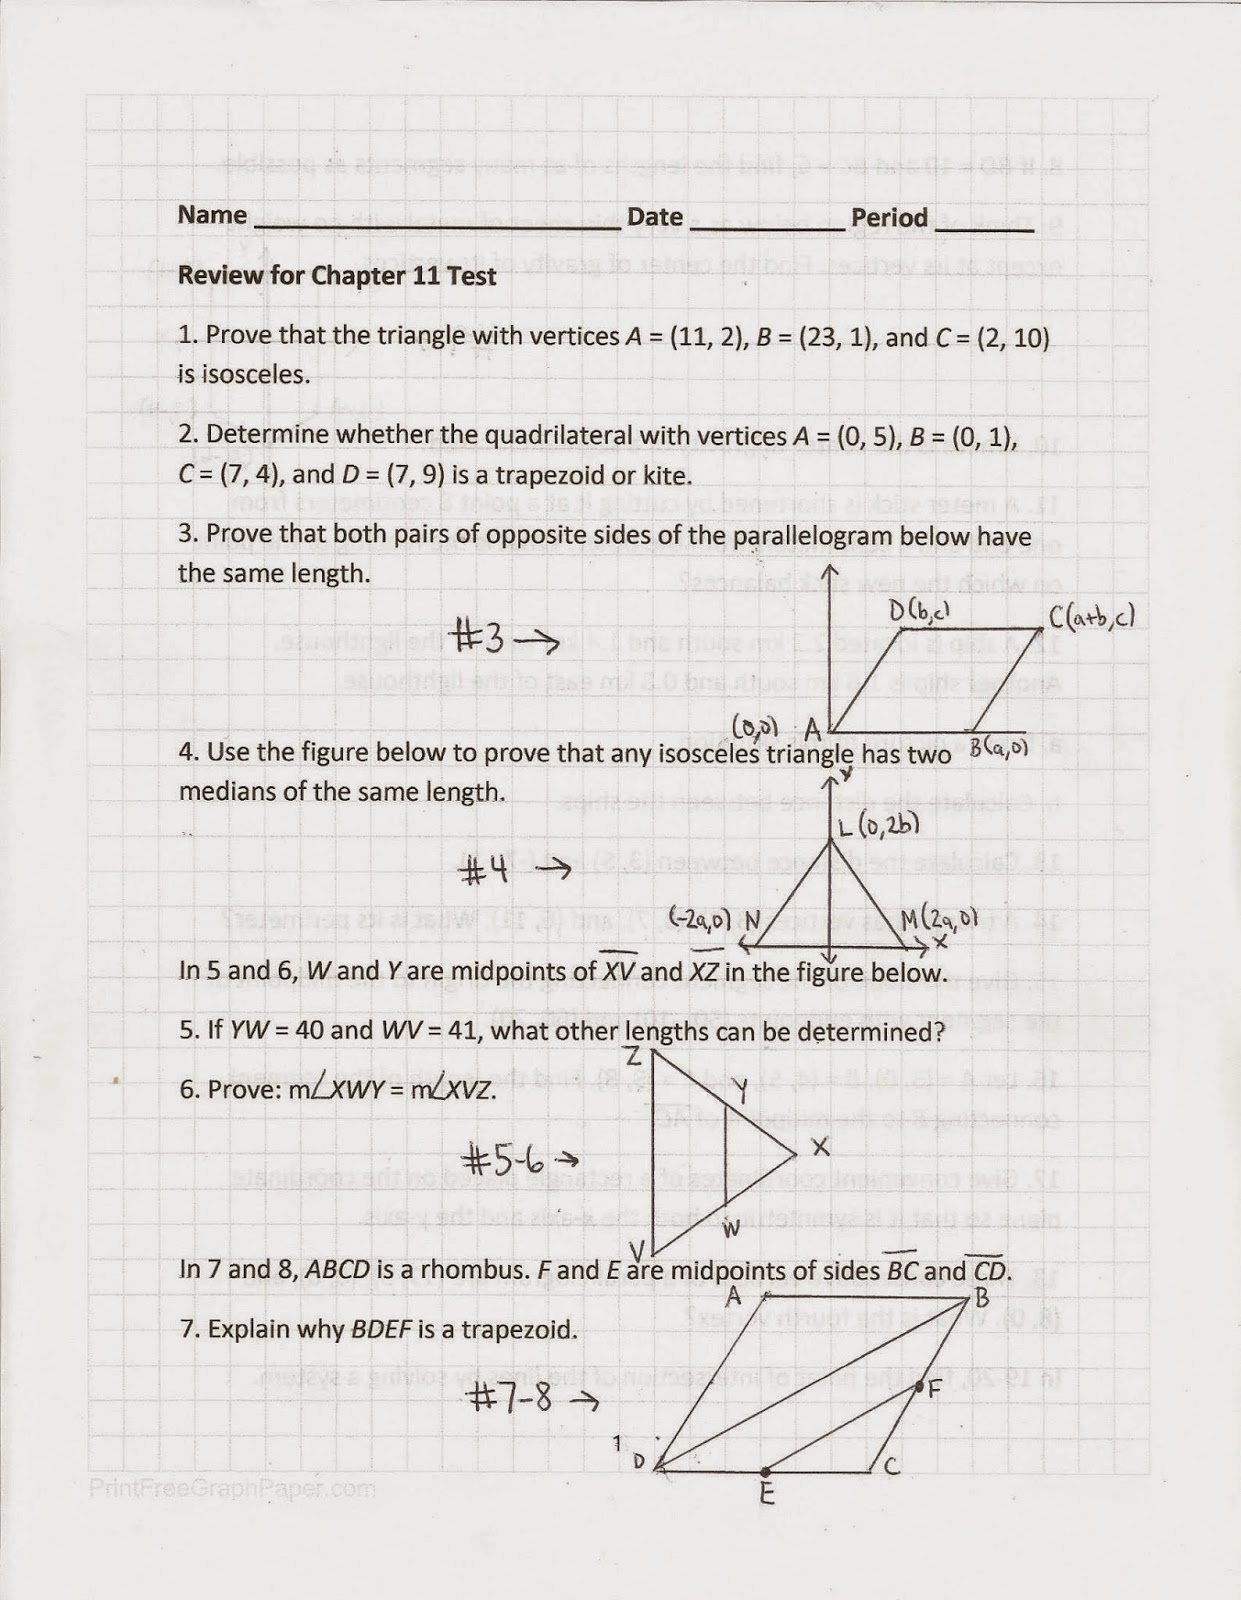 Geometry, Common Core Style Review for Chapter 1112 Test (Day 101)